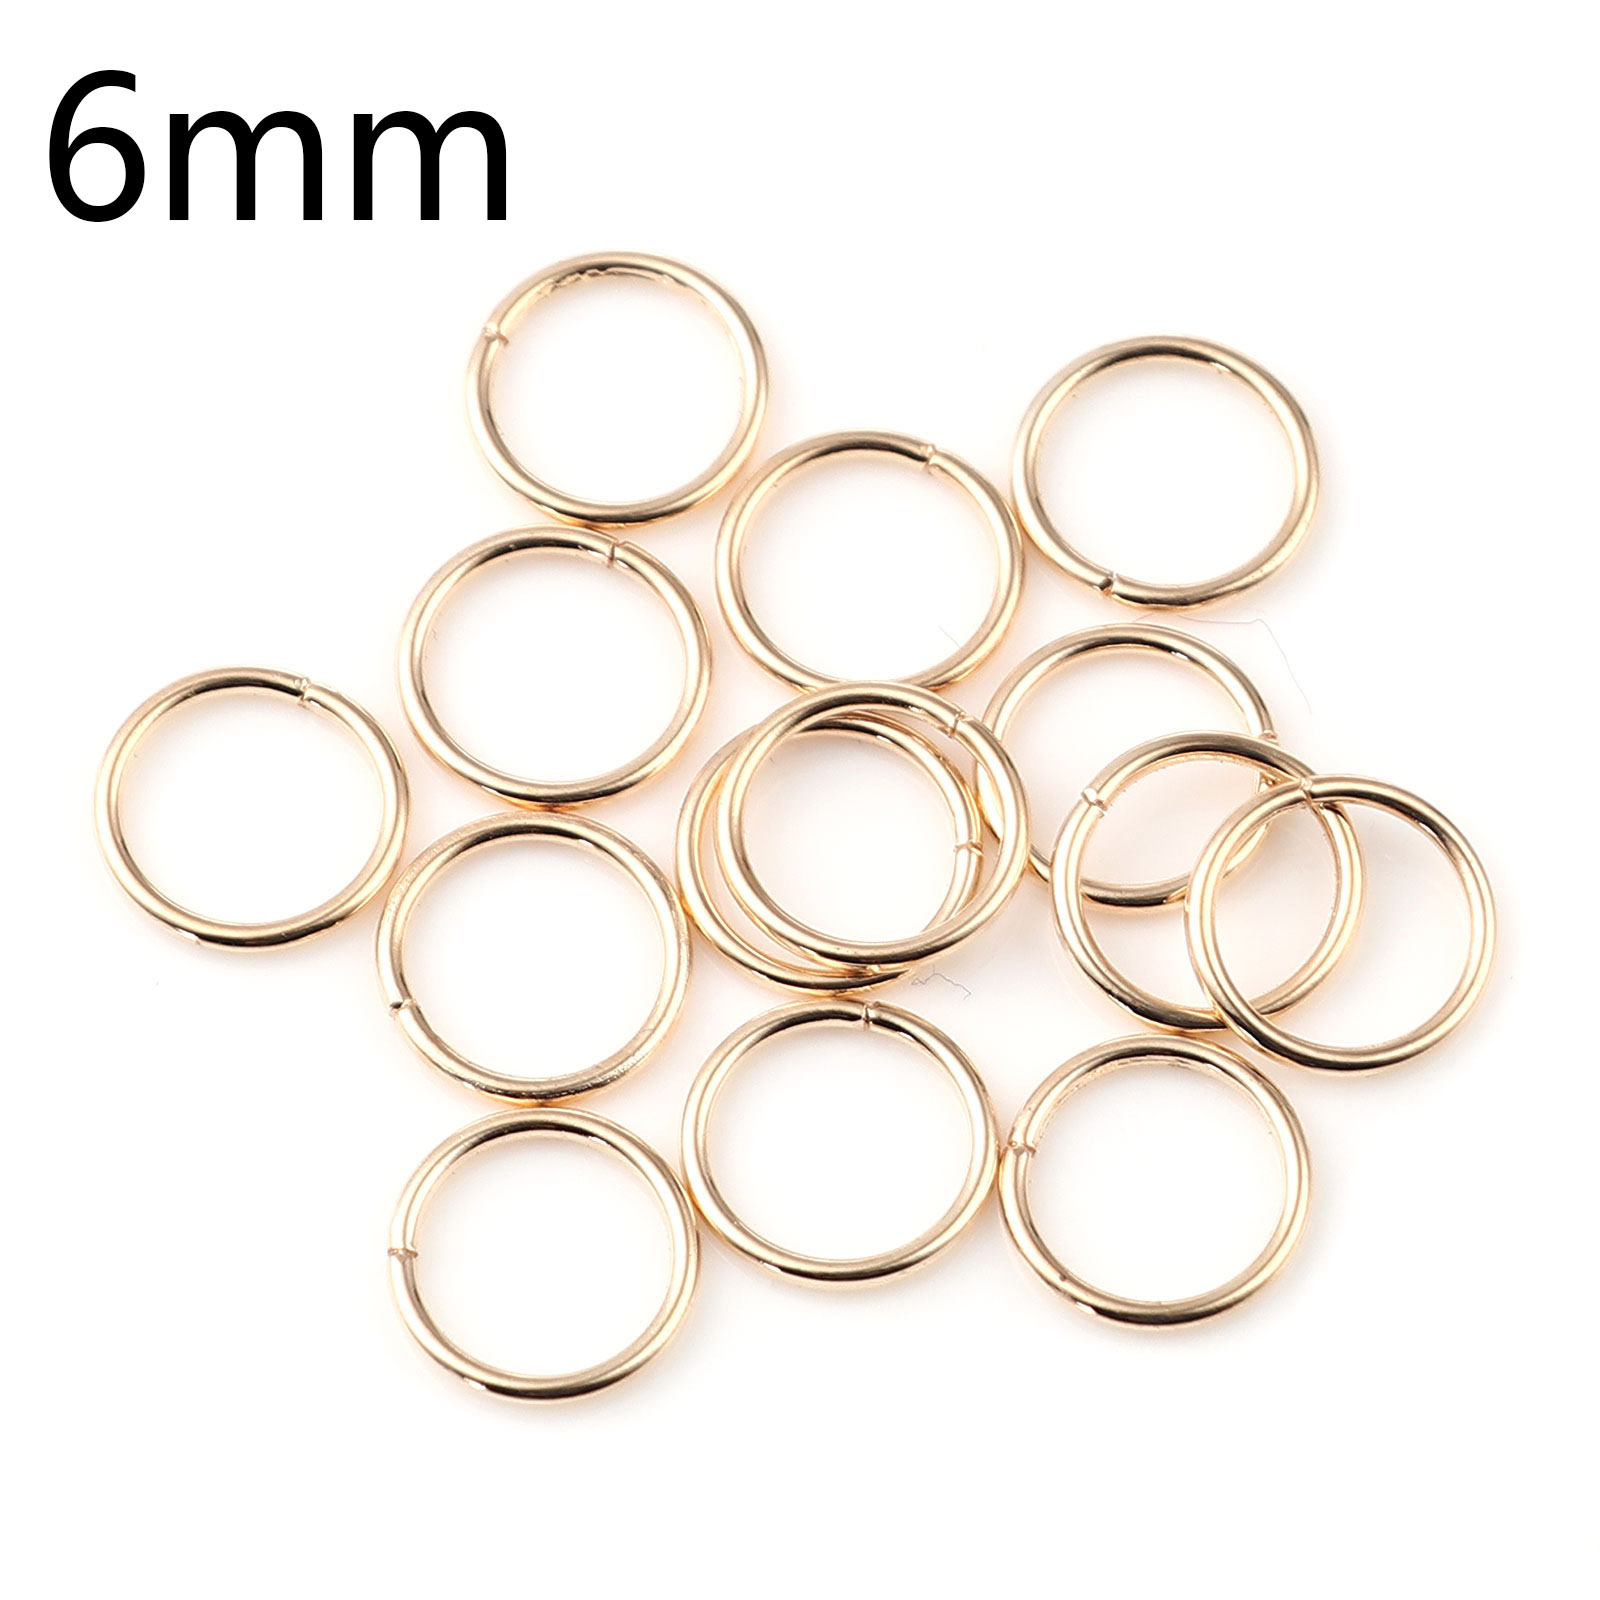 Picture of 0.7mm Iron Based Alloy Open Jump Rings Findings Circle Ring KC Gold Plated 6mm Dia, 200 PCs